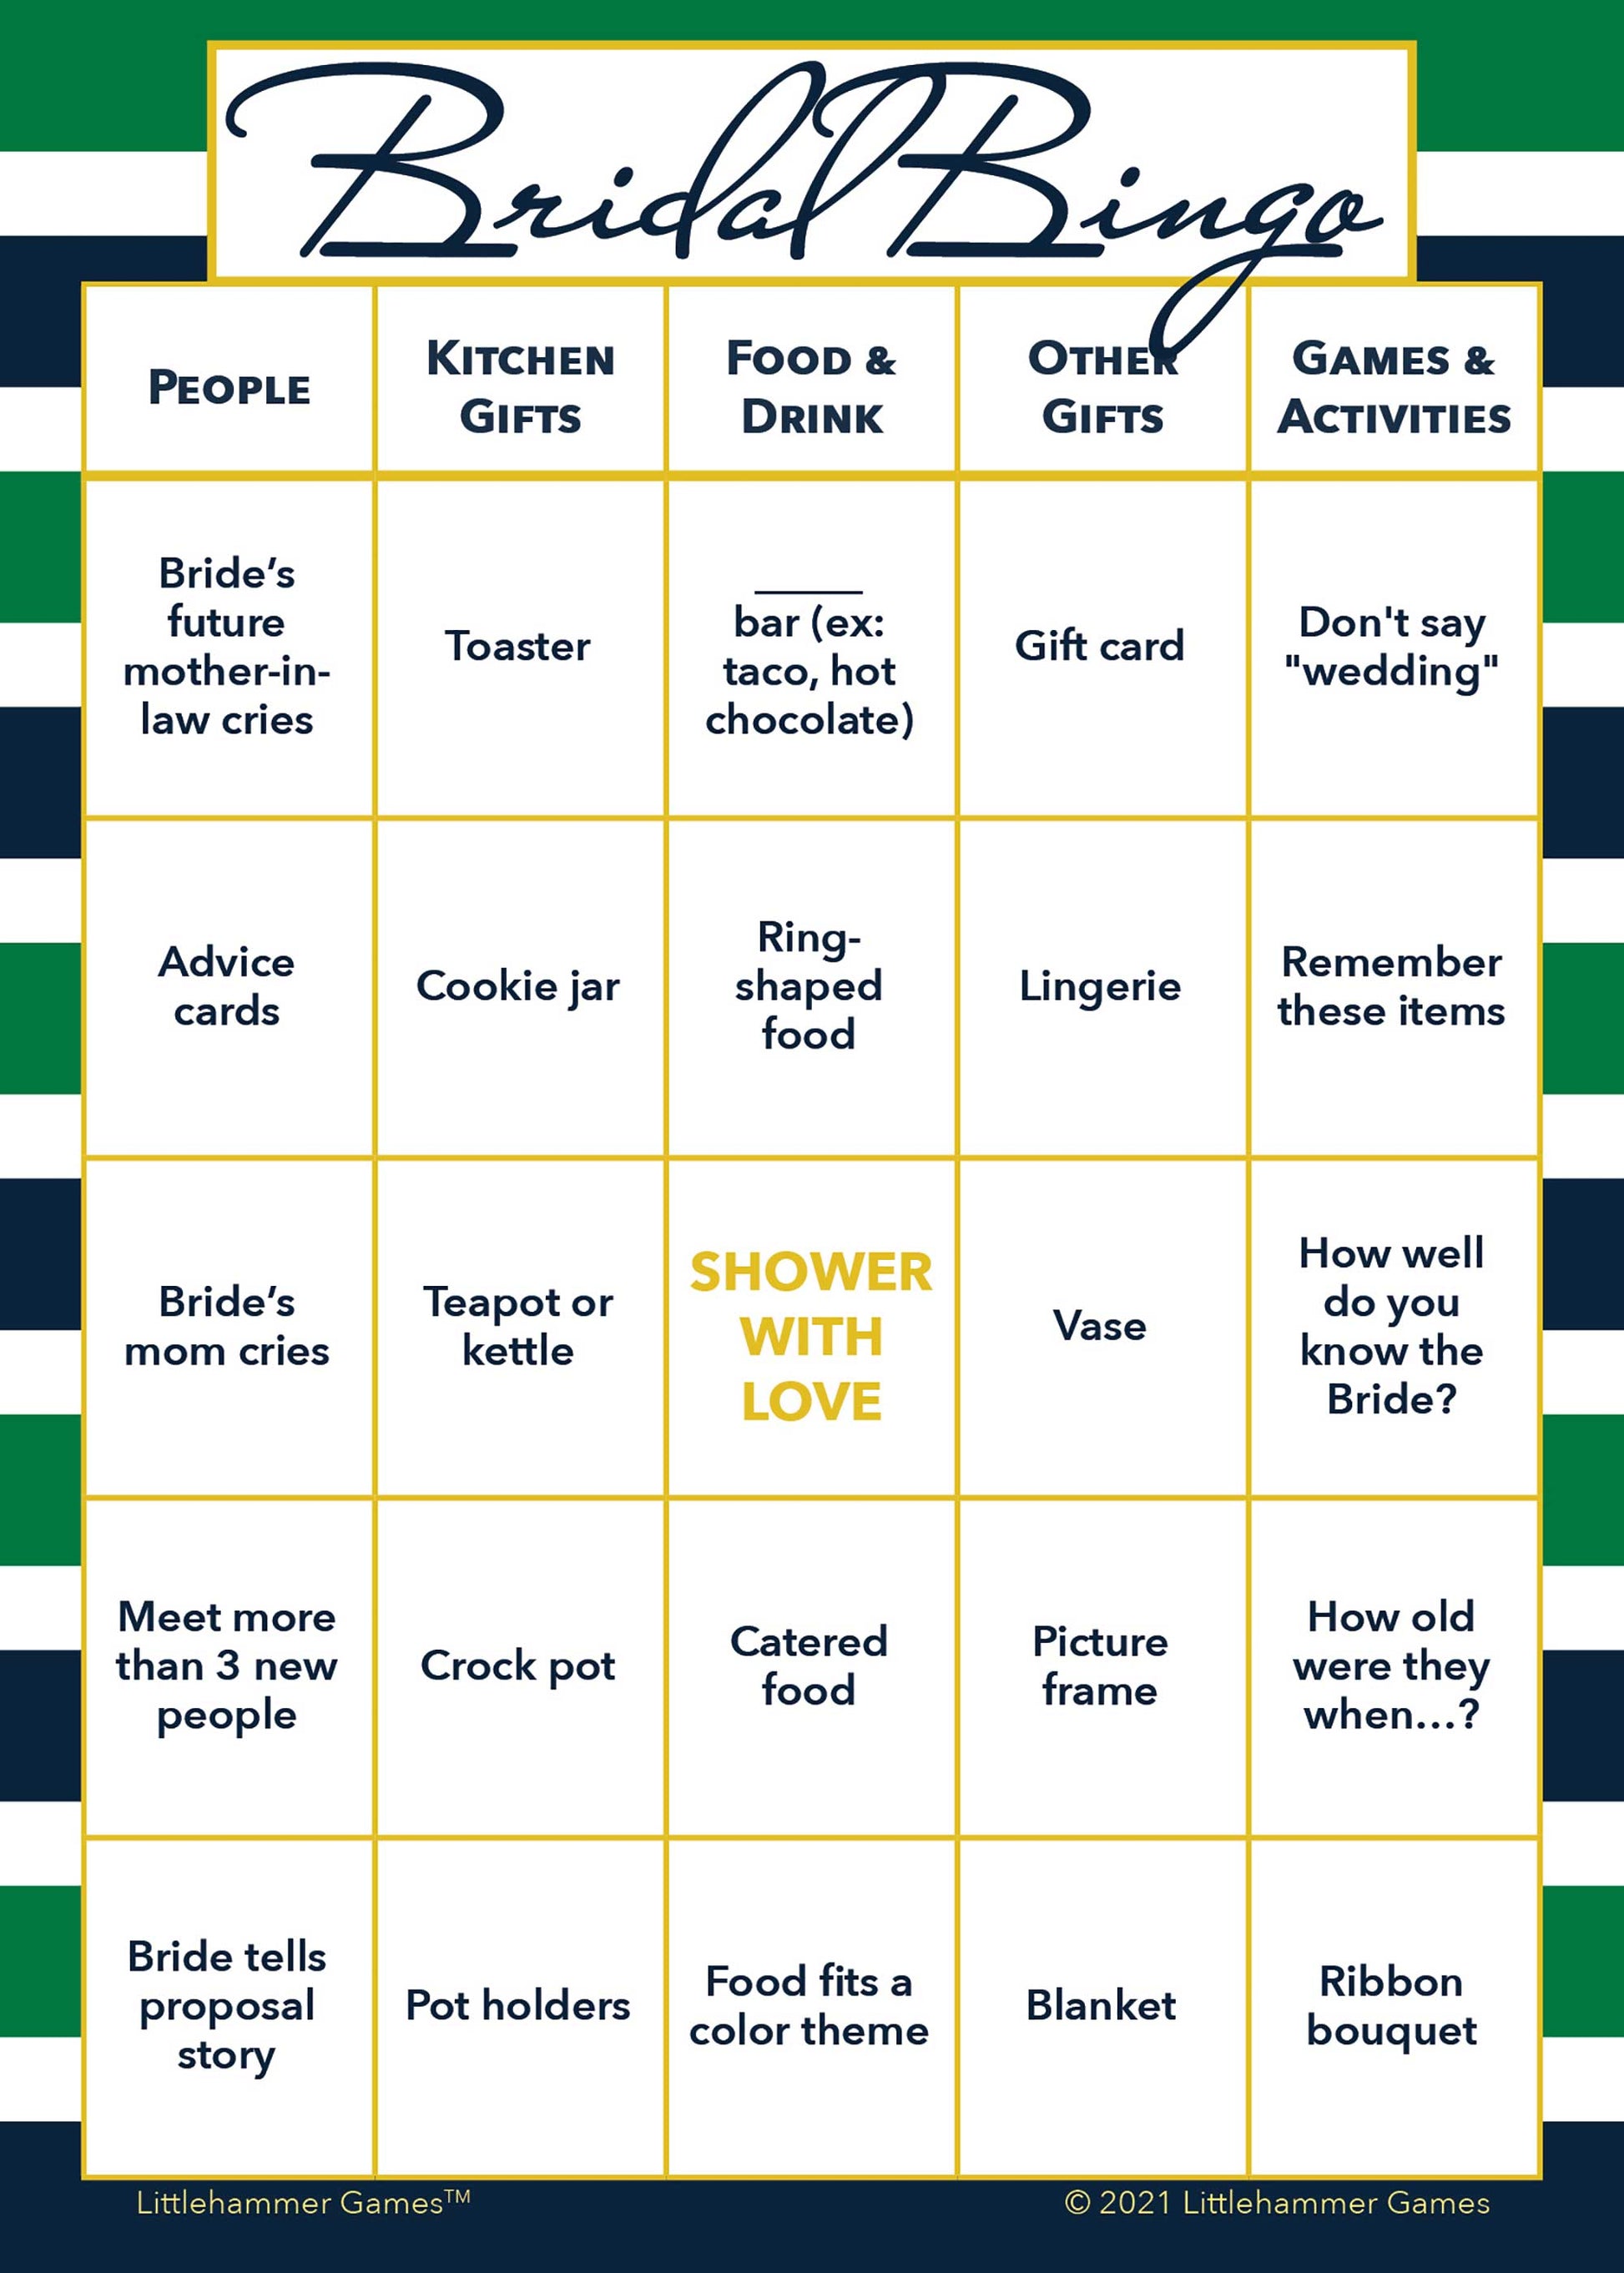 Bridal Bingo game card with a green and navy-striped background